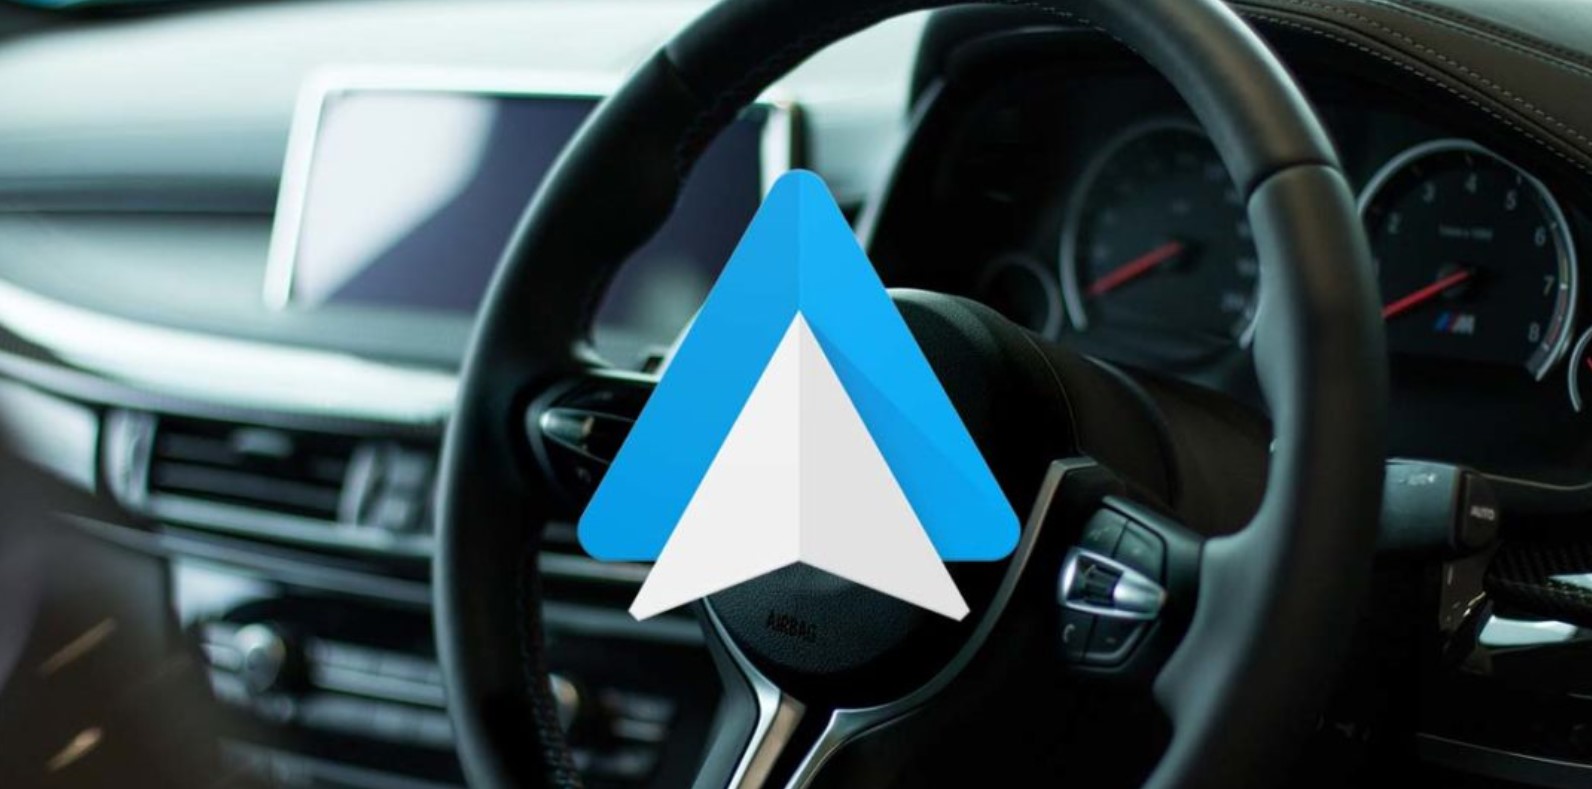 Android Auto Does Not Connect To The Car: 5 Solutions To Connect The Mobile